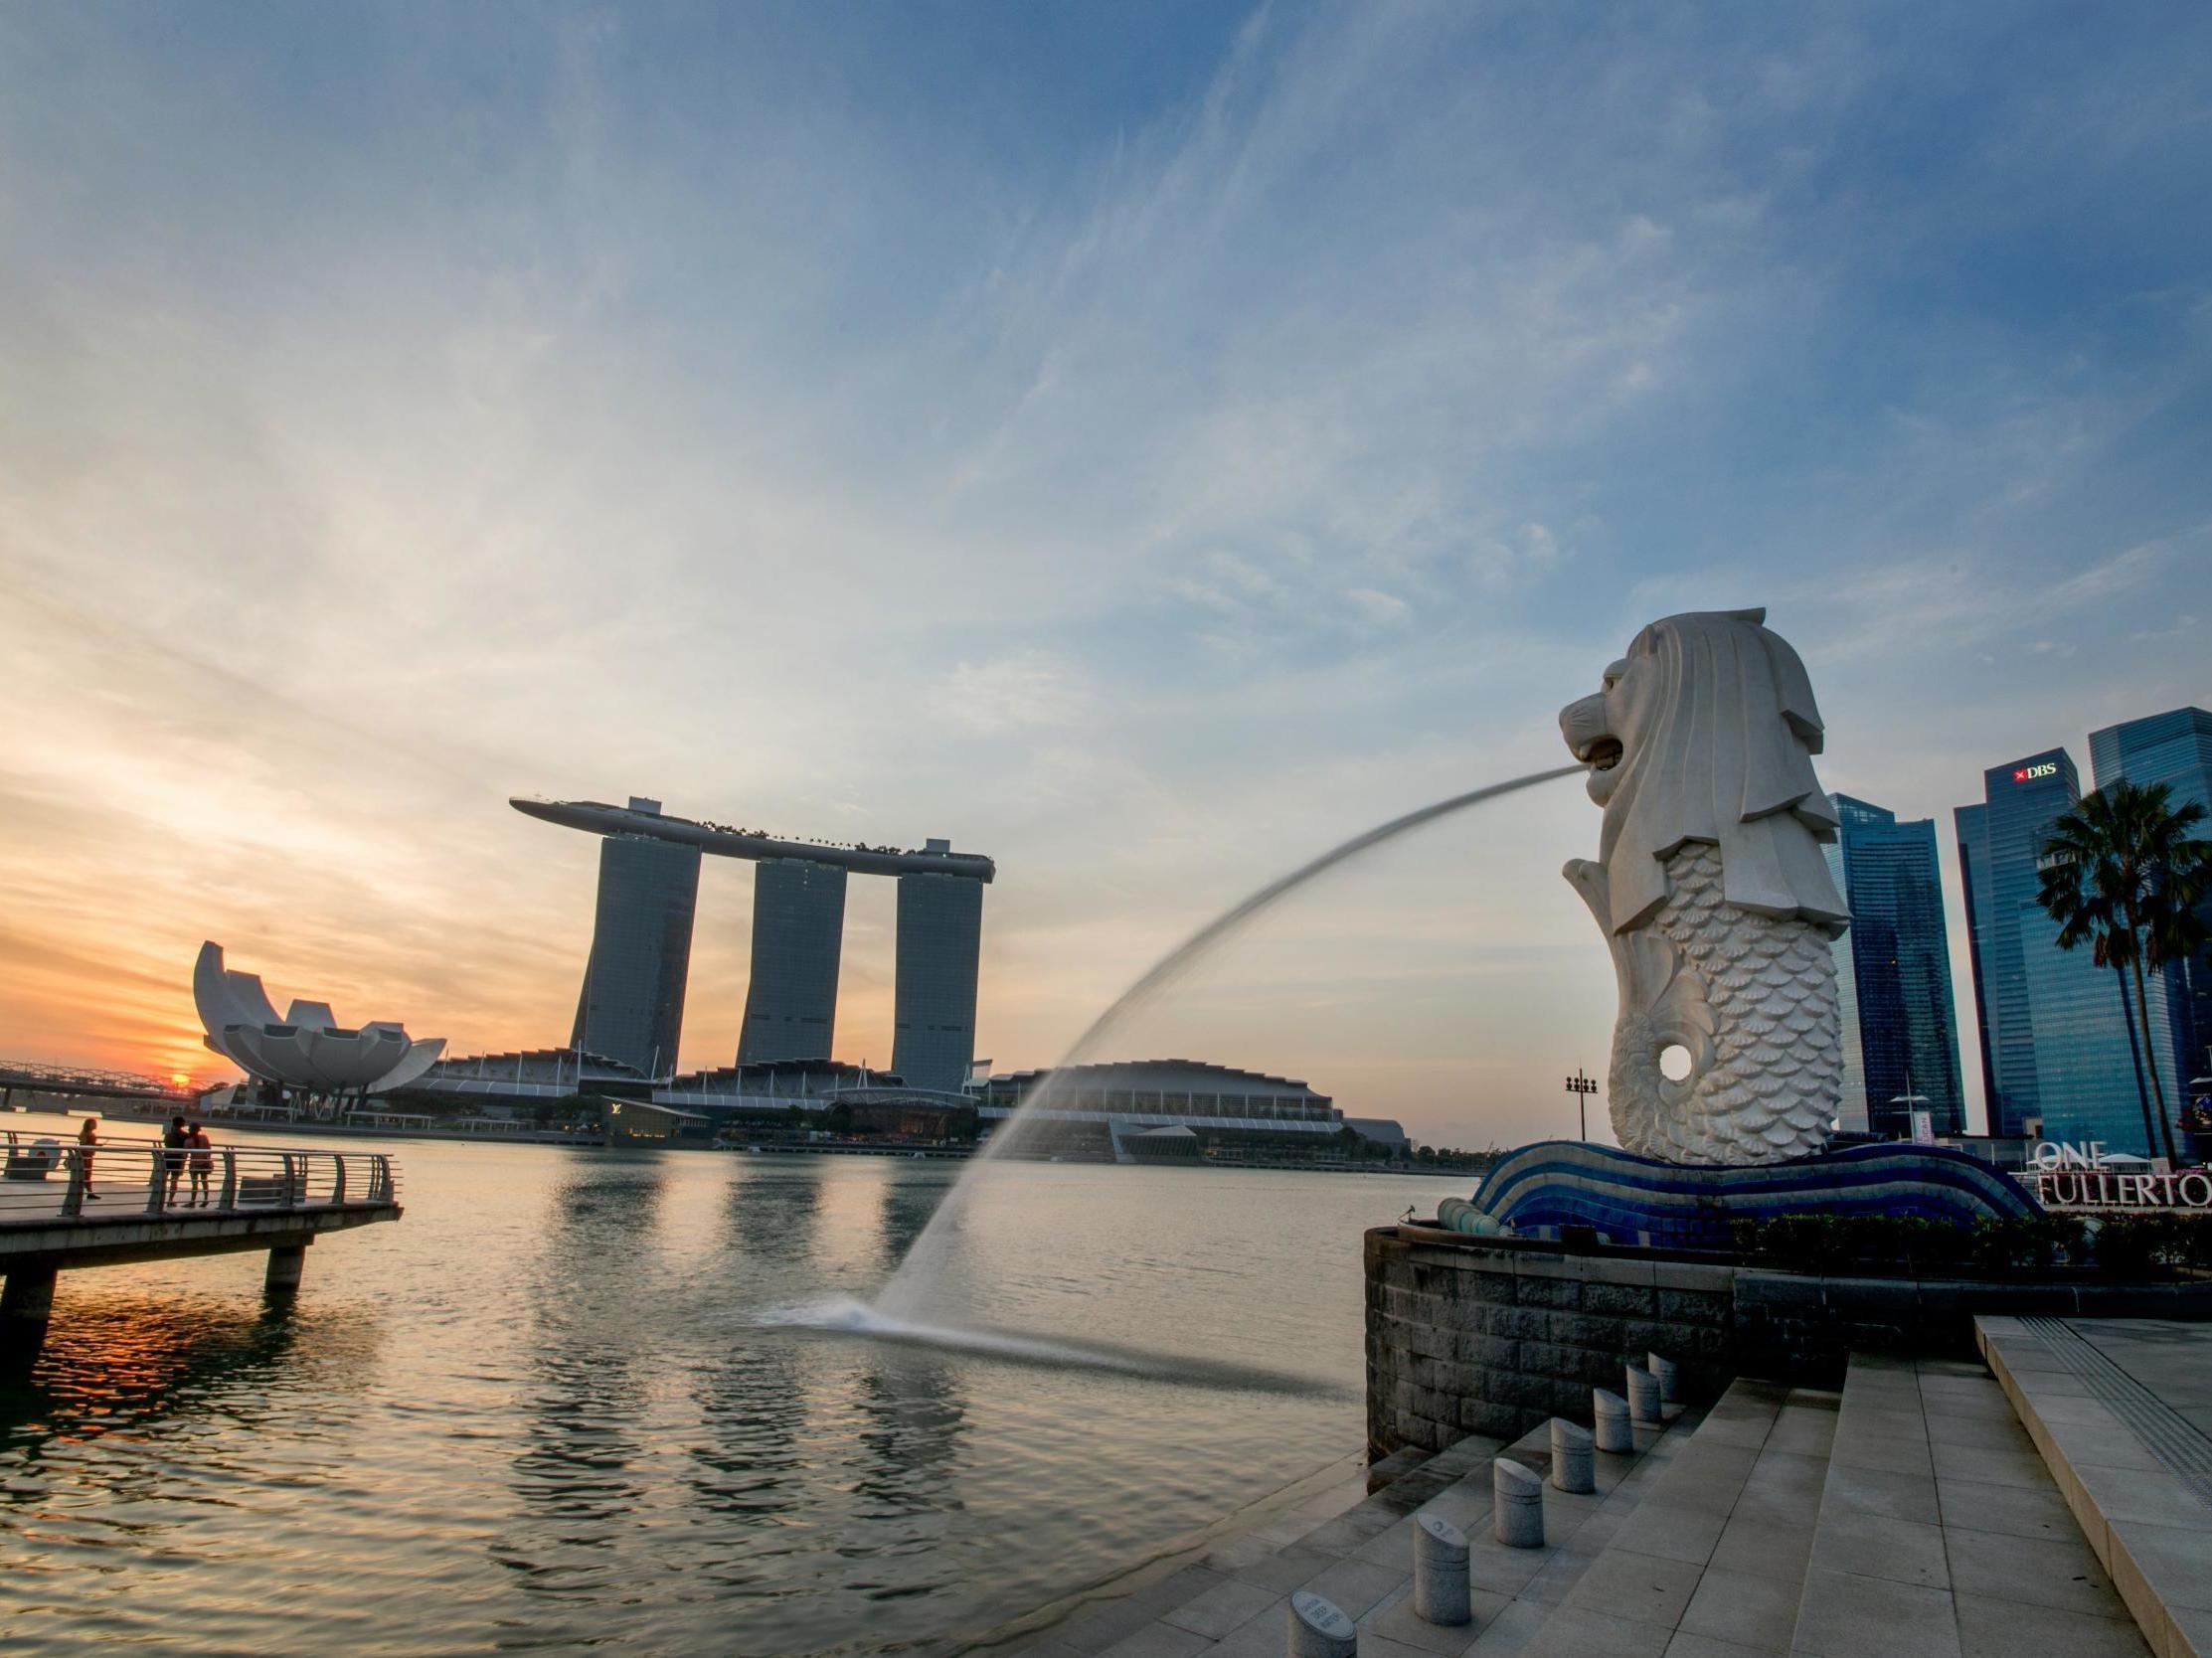 The Merlion is a must if you visit Singapore